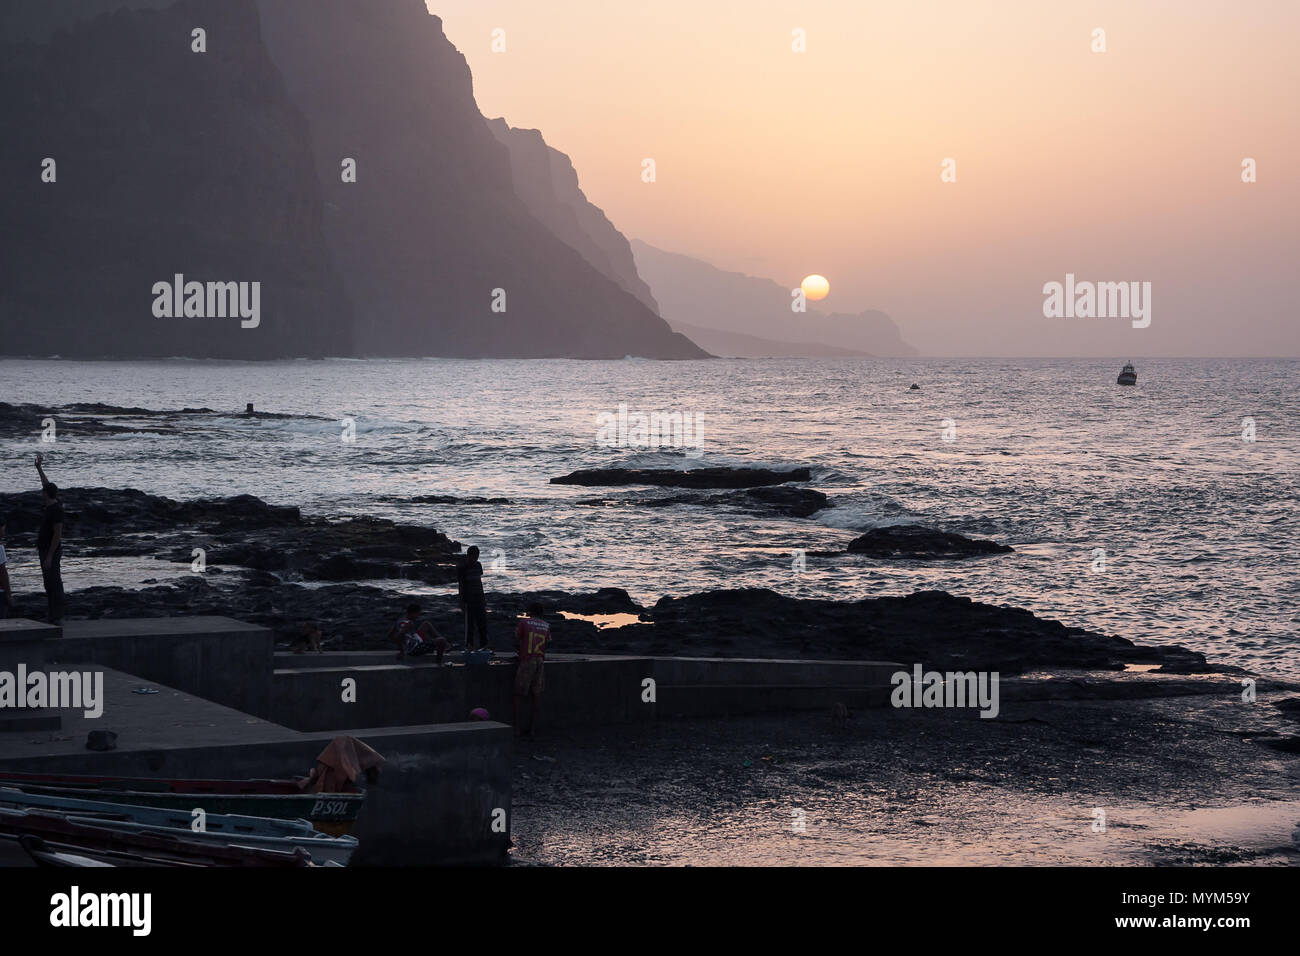 PONTA DO SOL, CAPE VERDE - DECEMBER 08, 2015: Beautiful sunset evening at the rocky shore of Santo Antao Island. People walking and watching the Sun,  Stock Photo